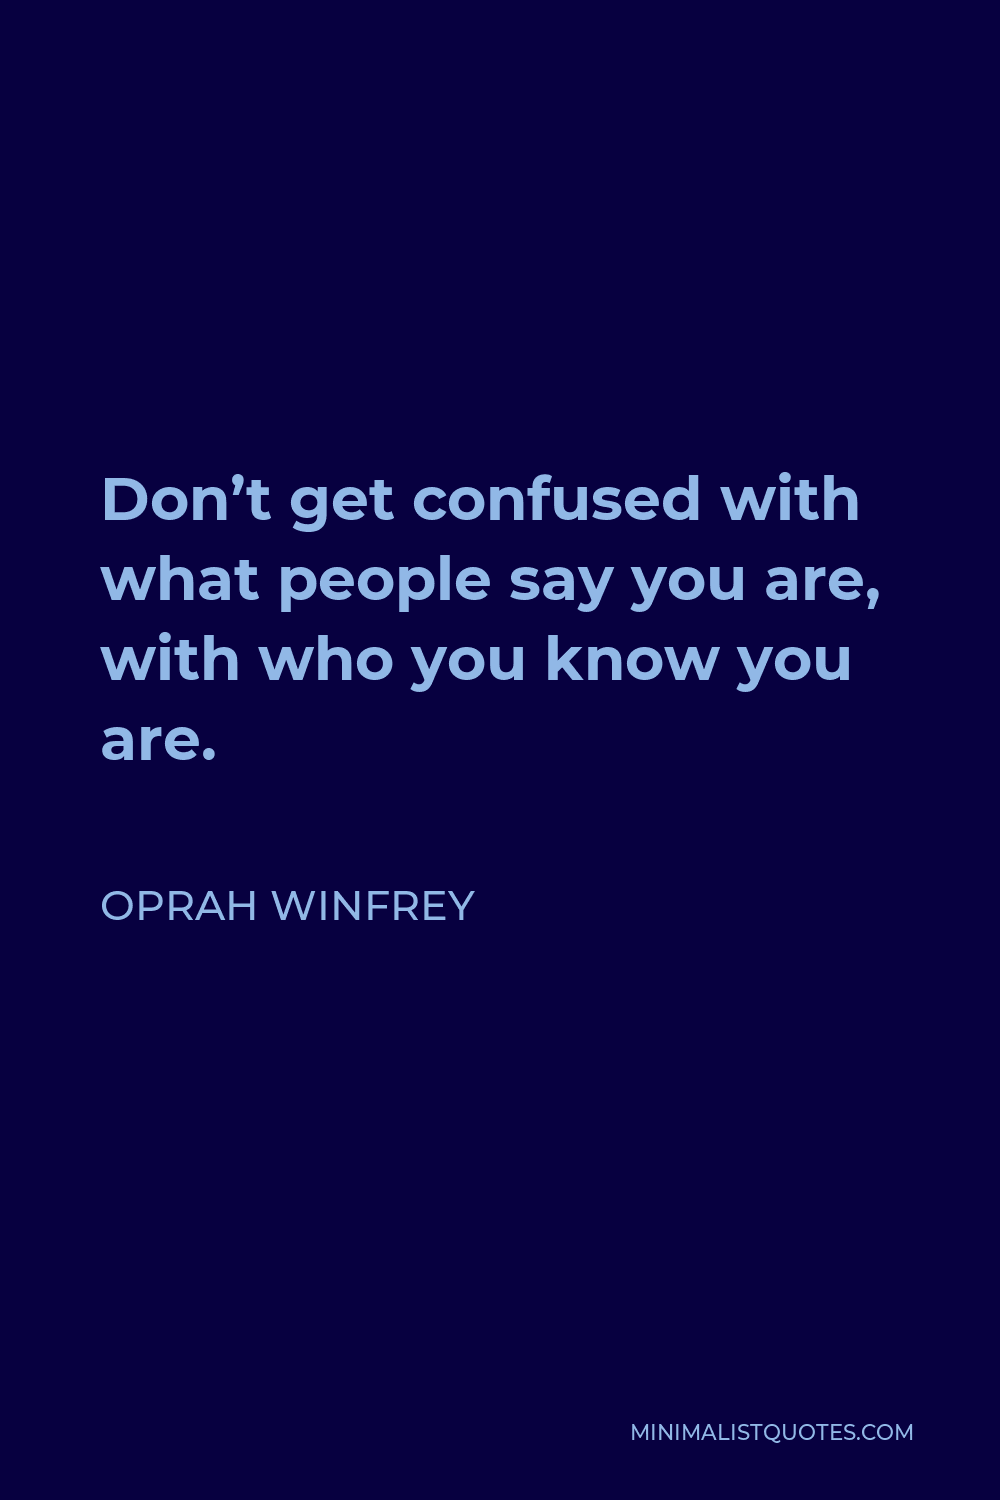 Oprah Winfrey Quote - Don’t get confused with what people say you are, with who you know you are.